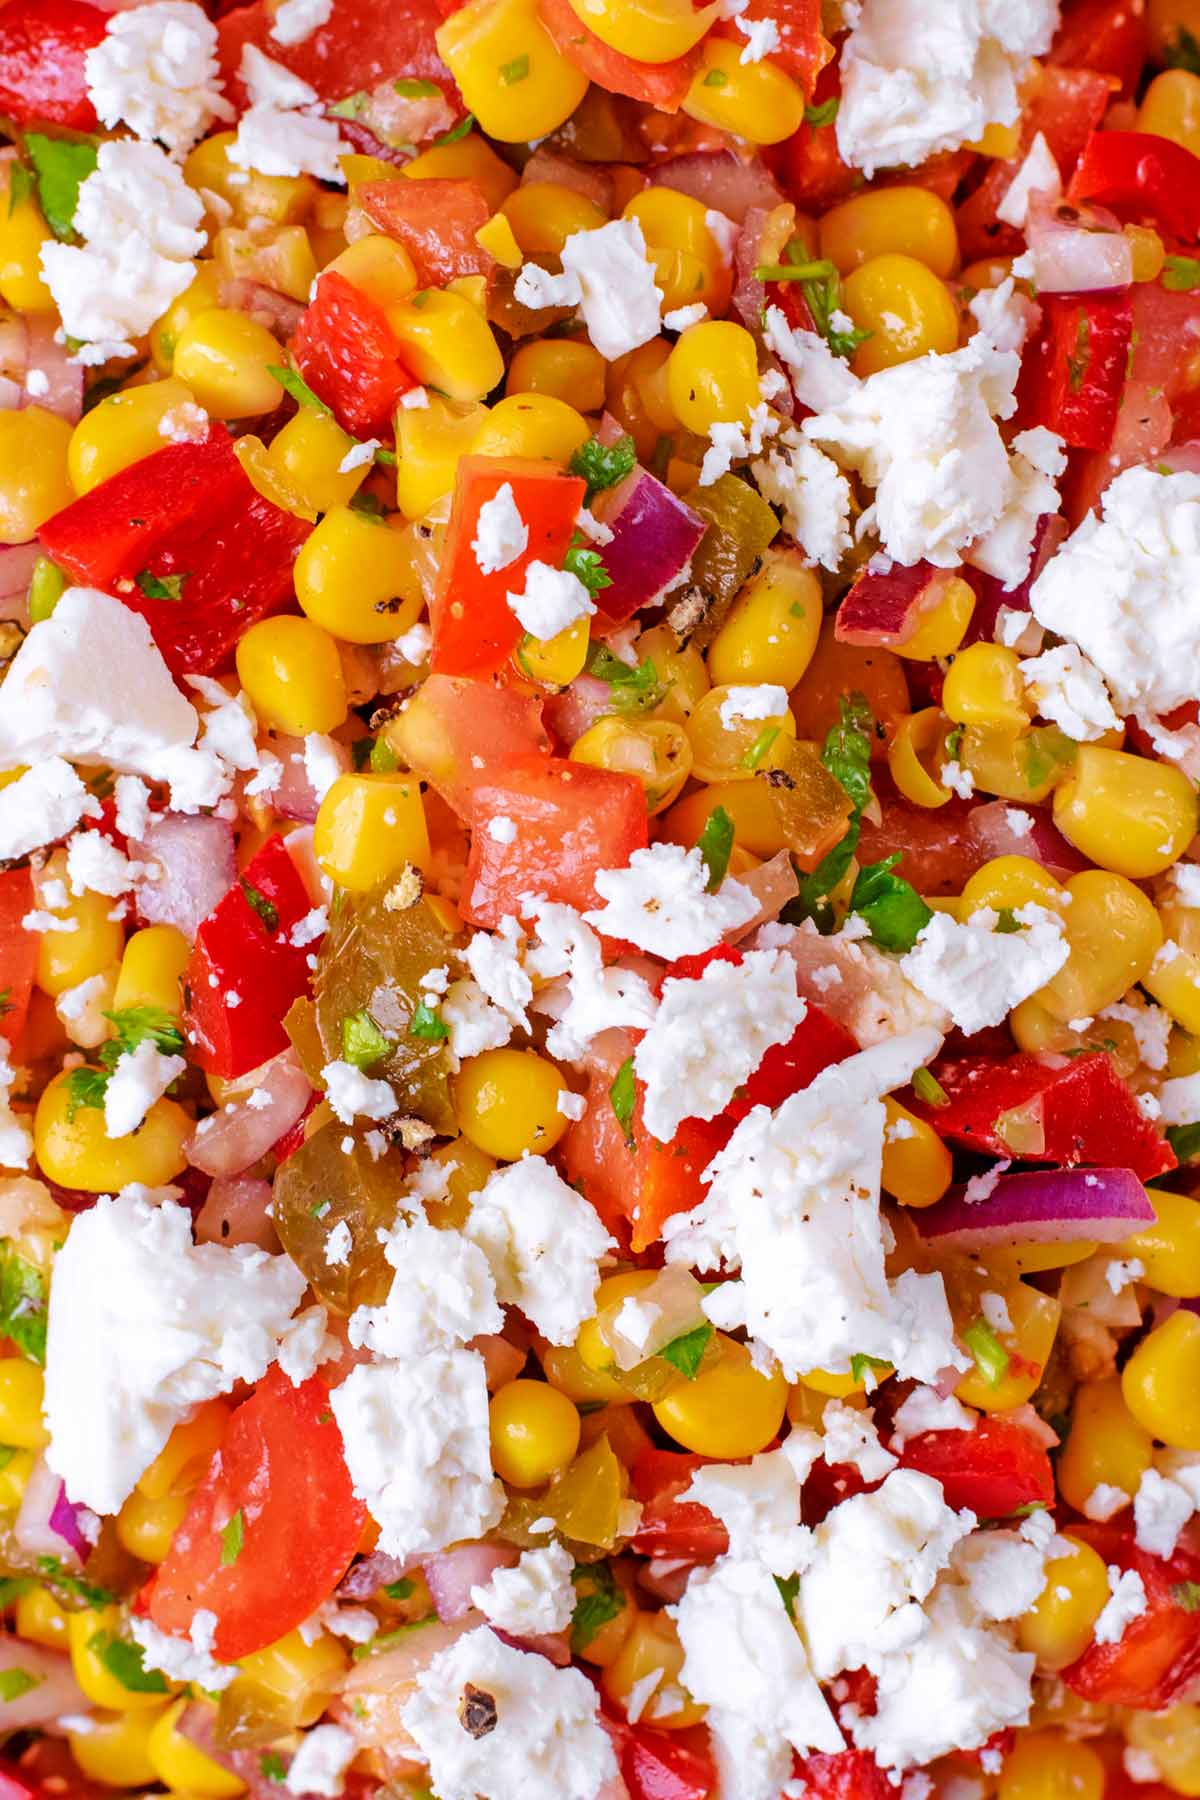 Sweetcorn, chopped peppers and tomatoes, herbs and feta.